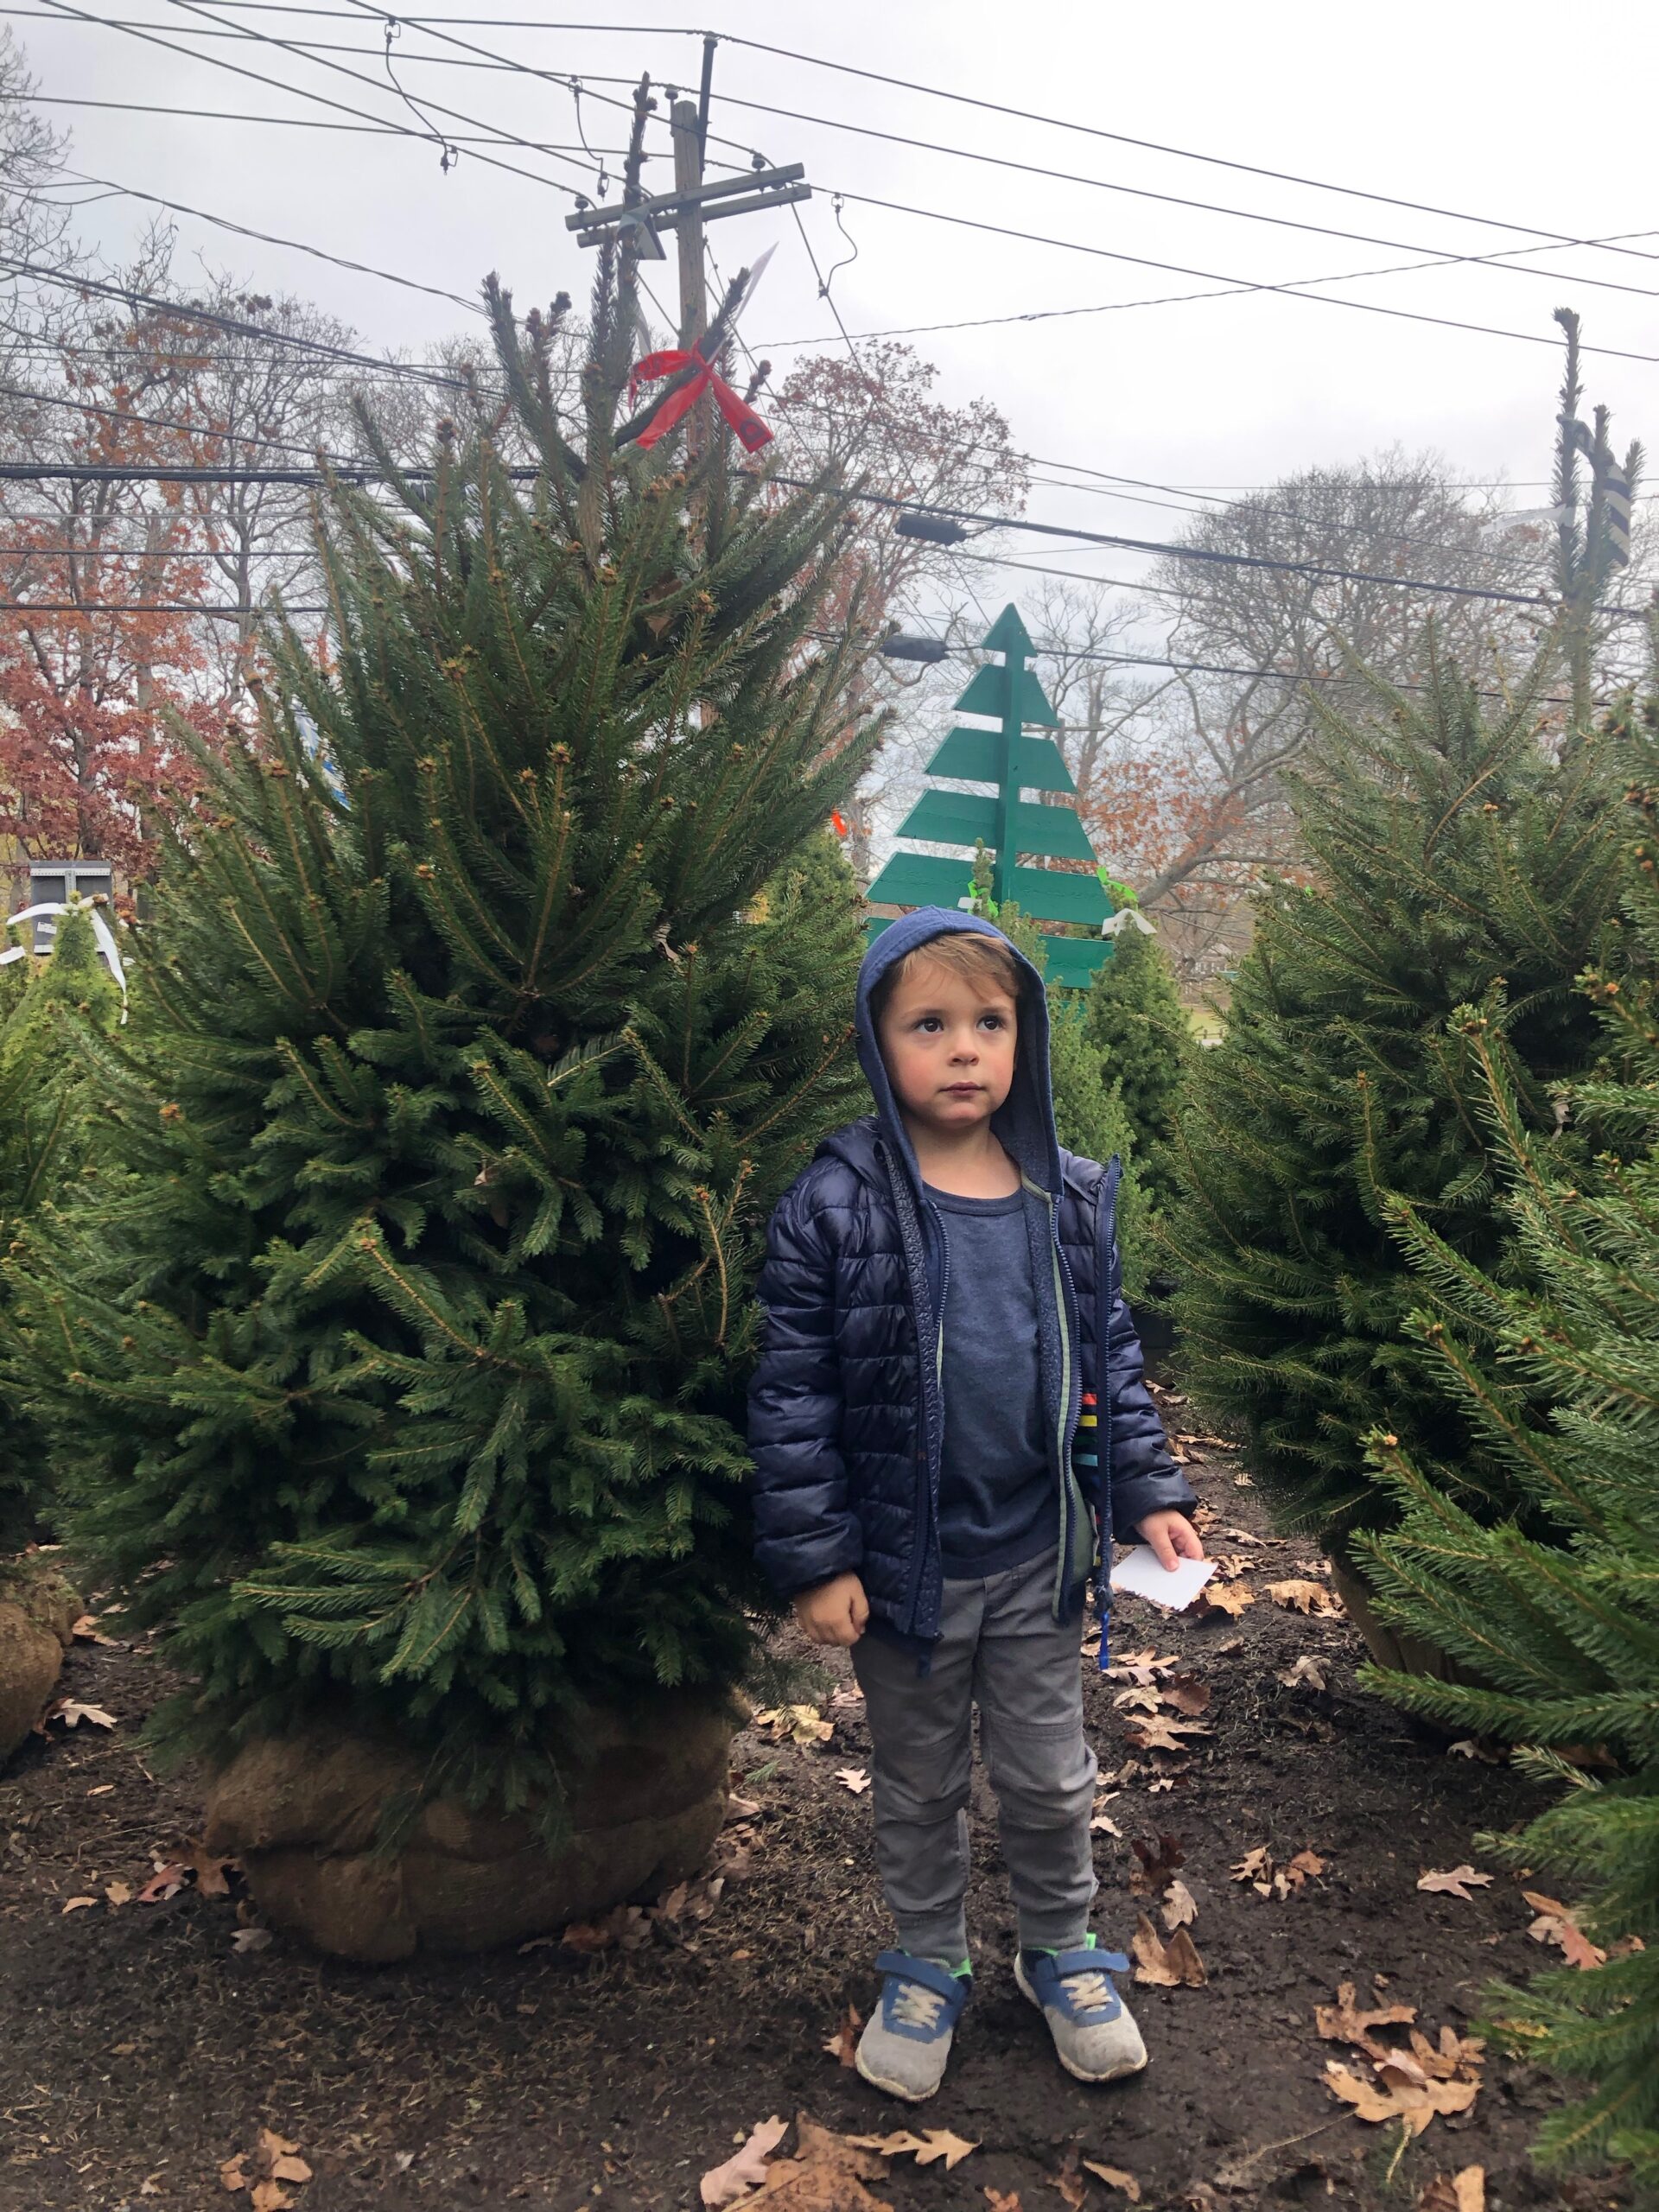 Casper Jenkins and his parents pick out a live potted tree every year from Buckley's Garden Center in East Hampton which has almost 200 potted spruce trees in various sizes, half of which are grown locally. JENNY NOBLE